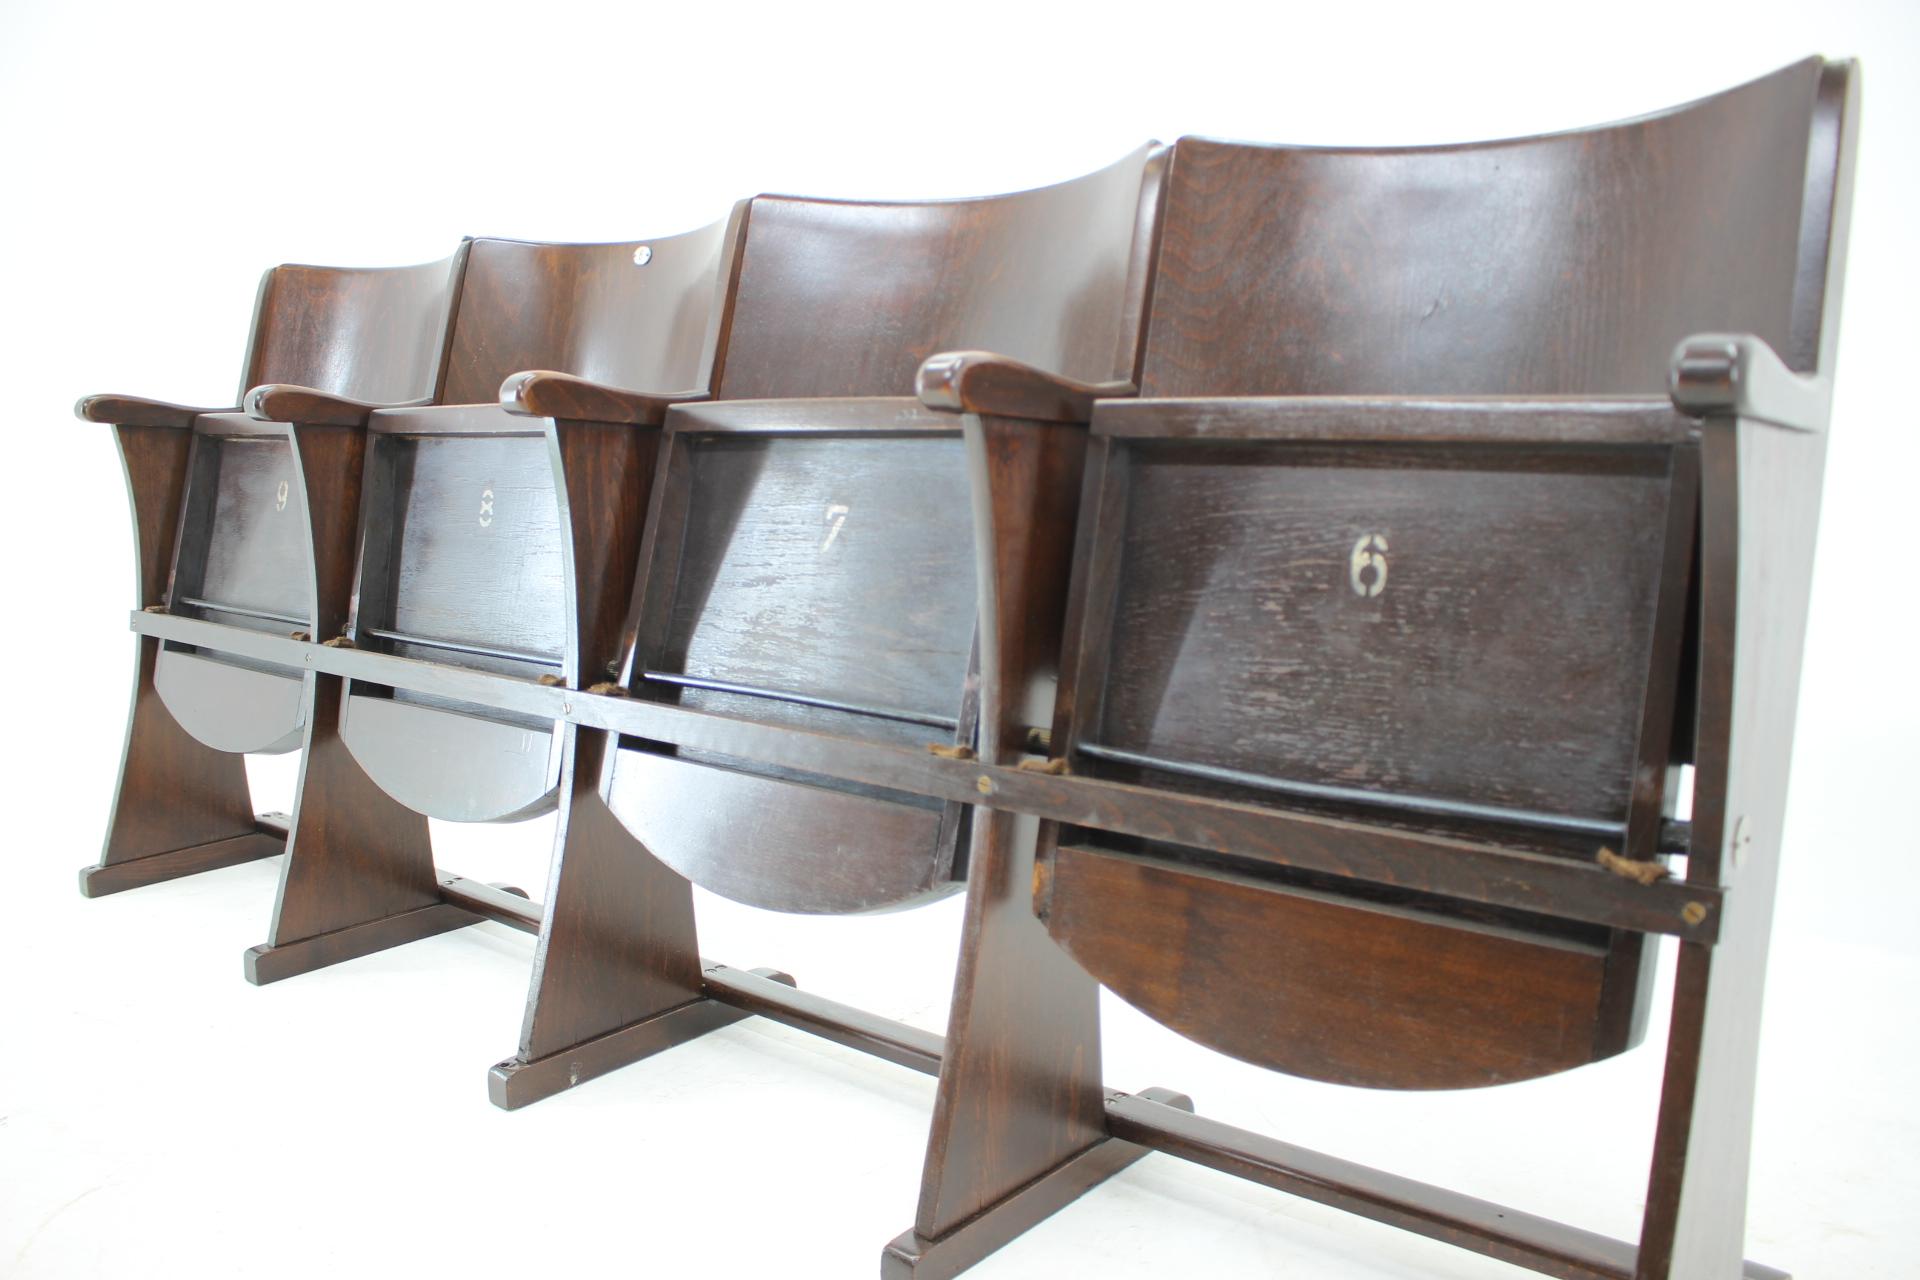 Czech Row of Cinema Chairs / Bench by Thonet, 1940s, 'Renovated'